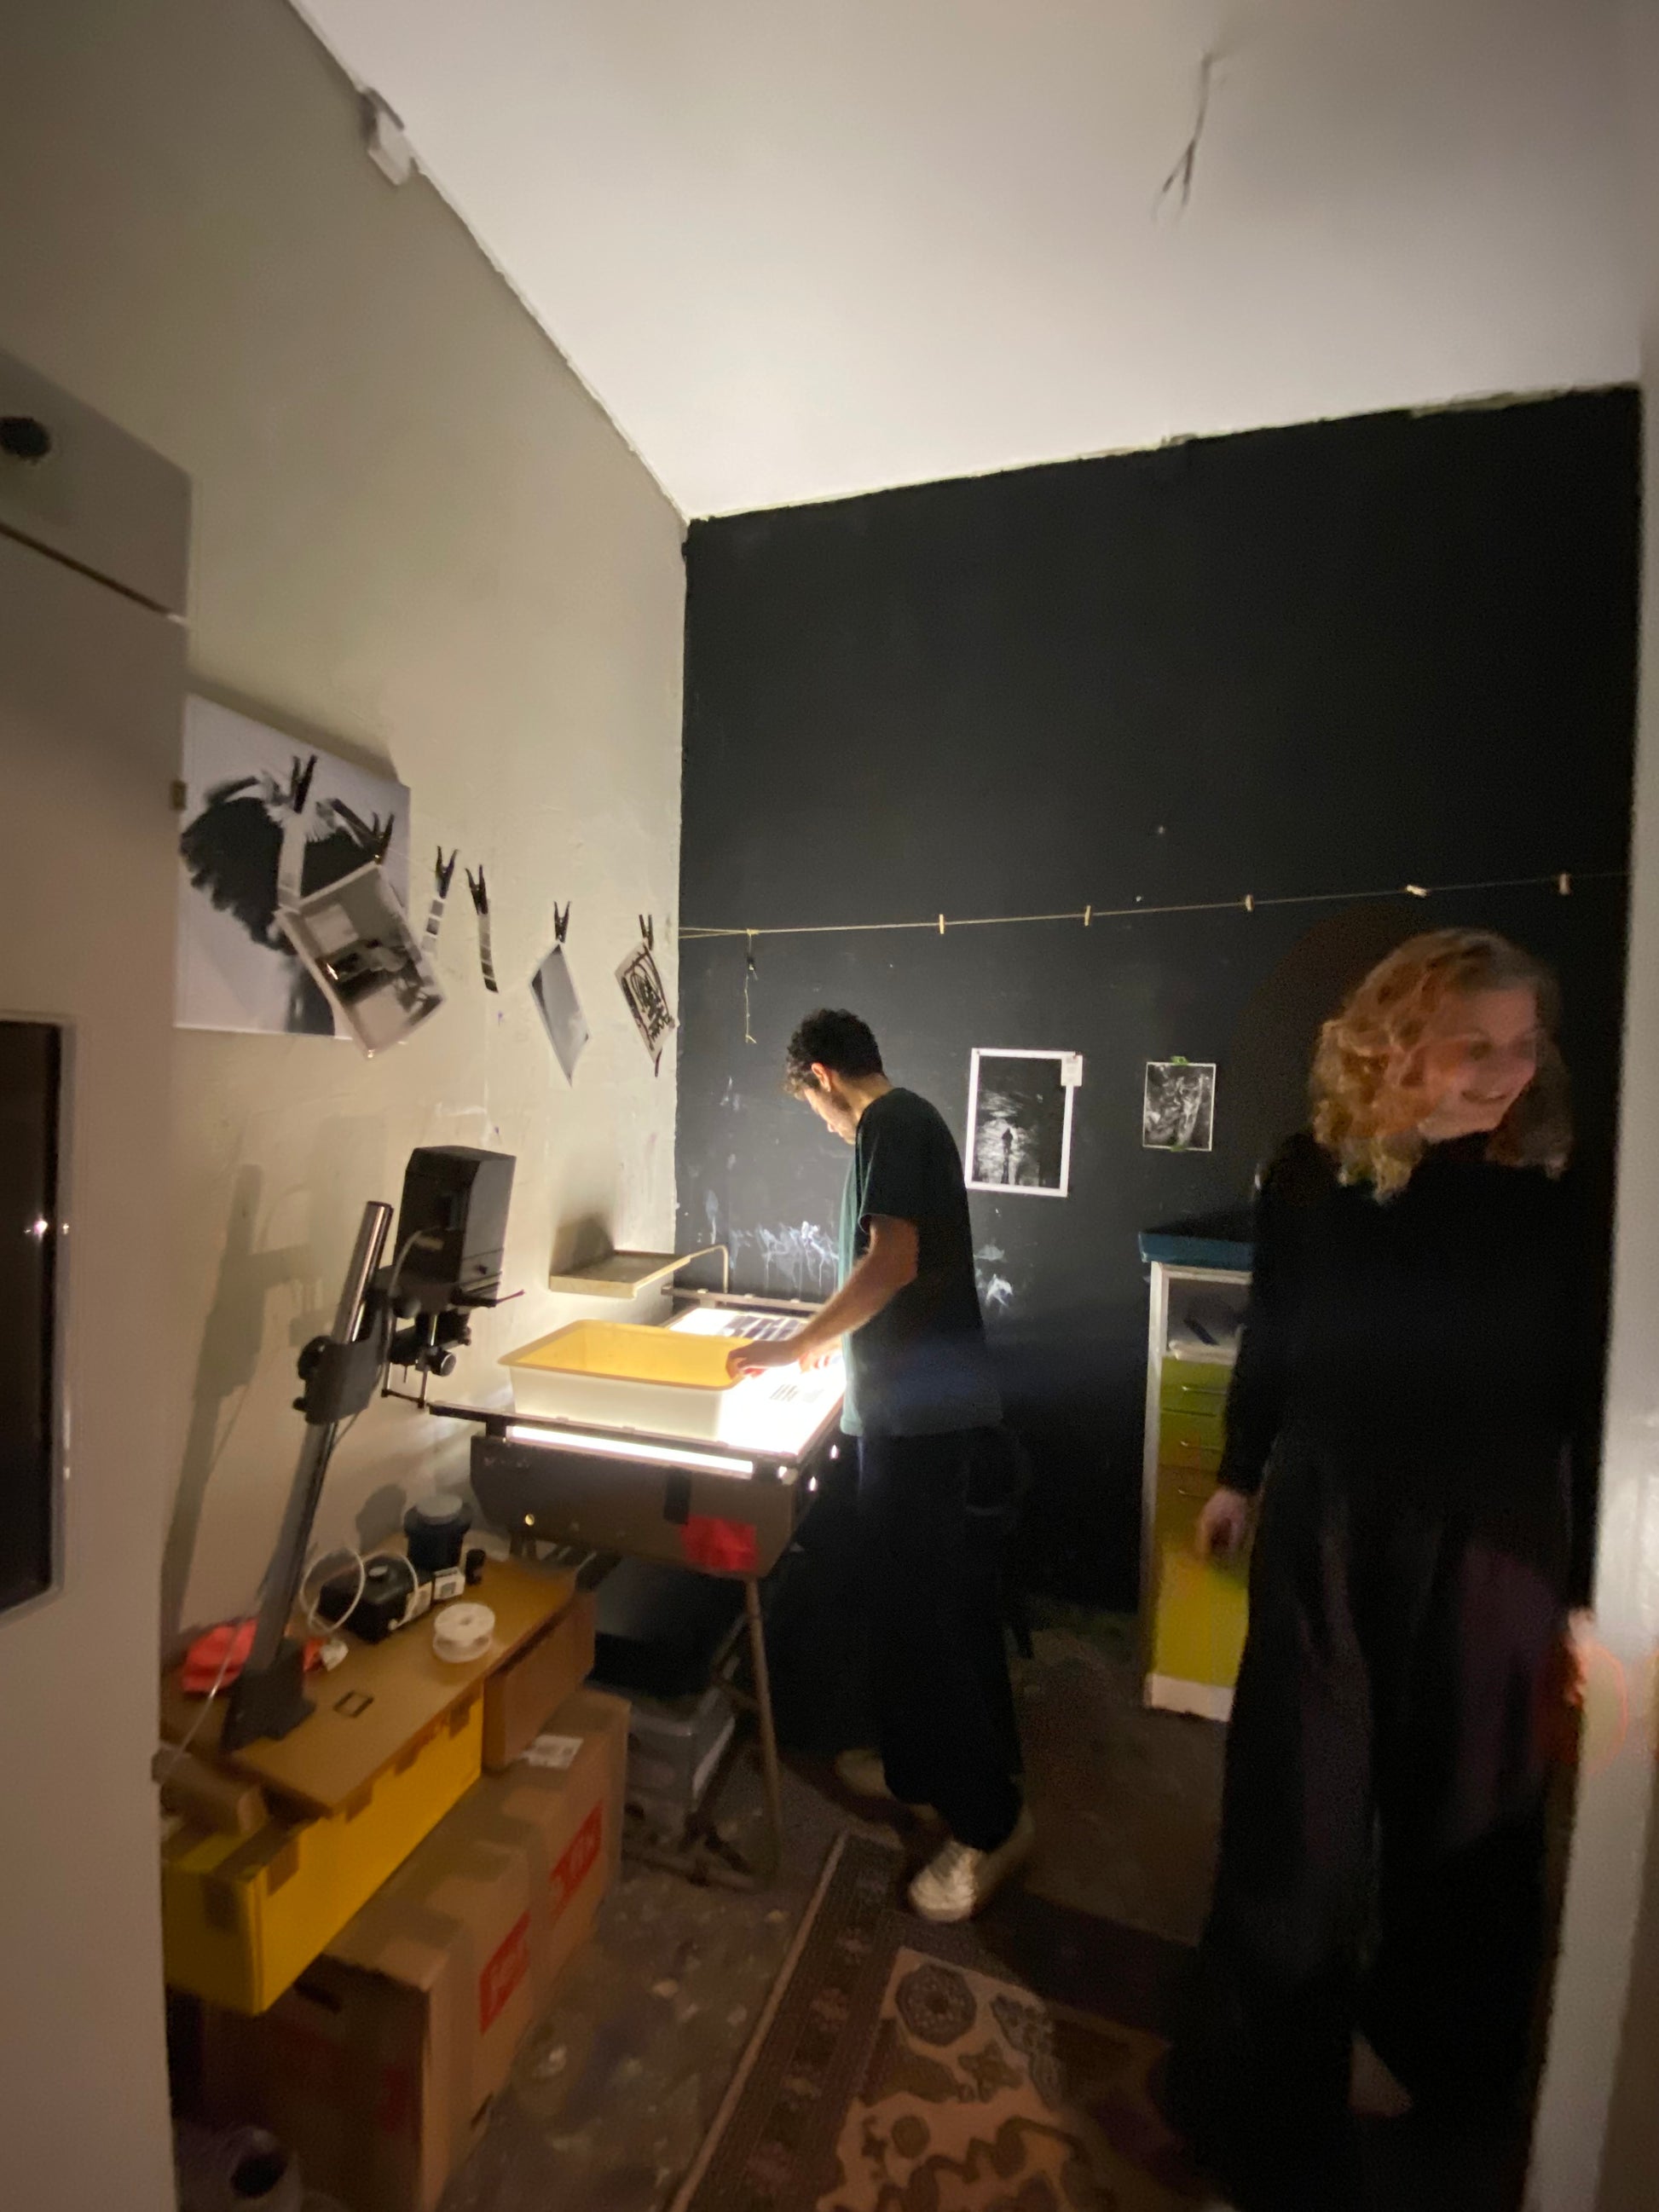 2 Days - Developing and Printing Analog Photography Workshop with Araiké in Berlin, Germany by subcultours